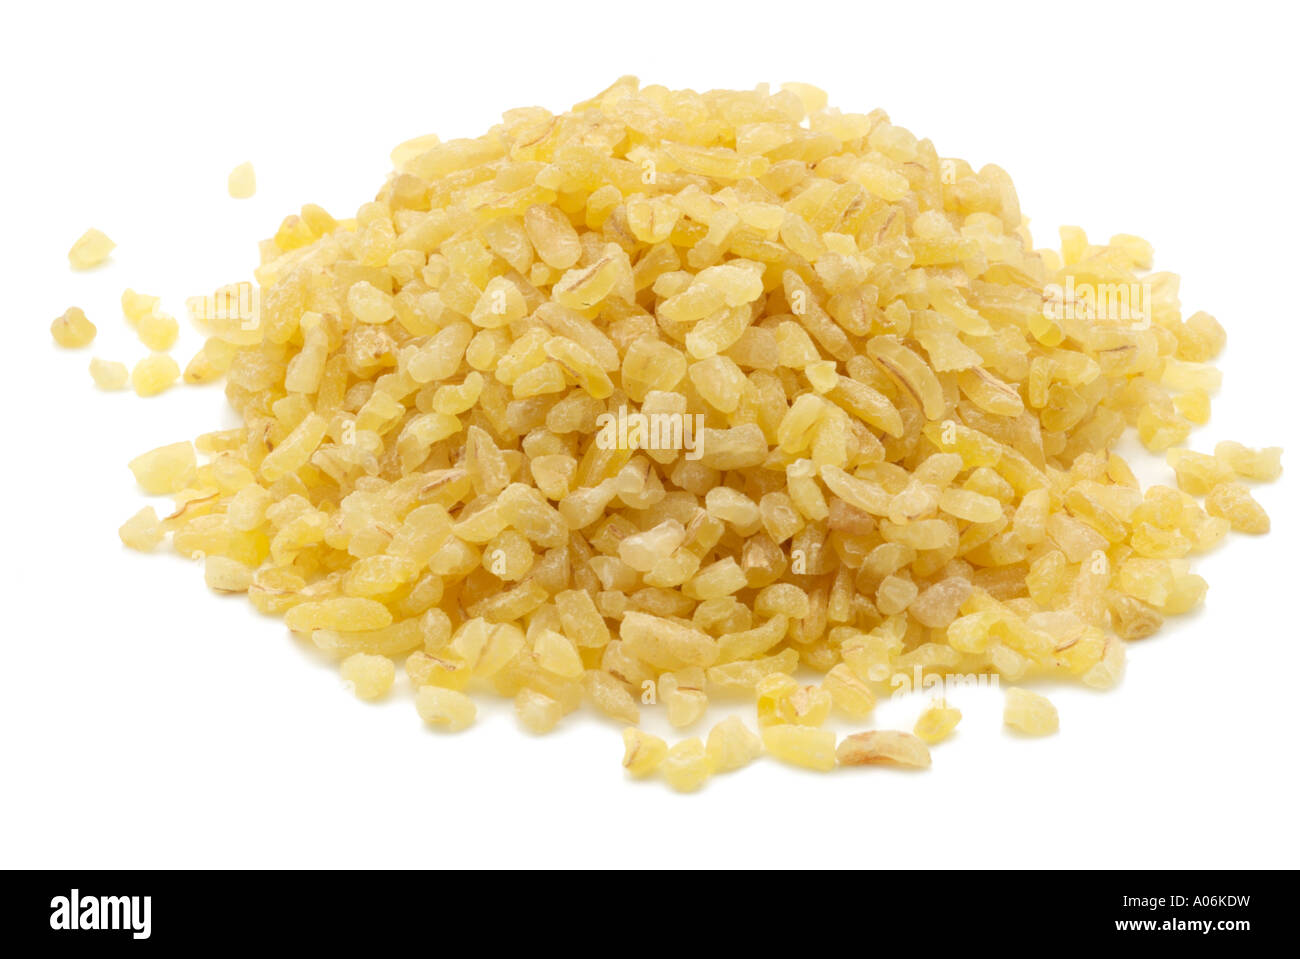 cous cous food coarse whole unprepared unprocessed whole wholesome health healthy natural  staple pasta wheat Stock Photo